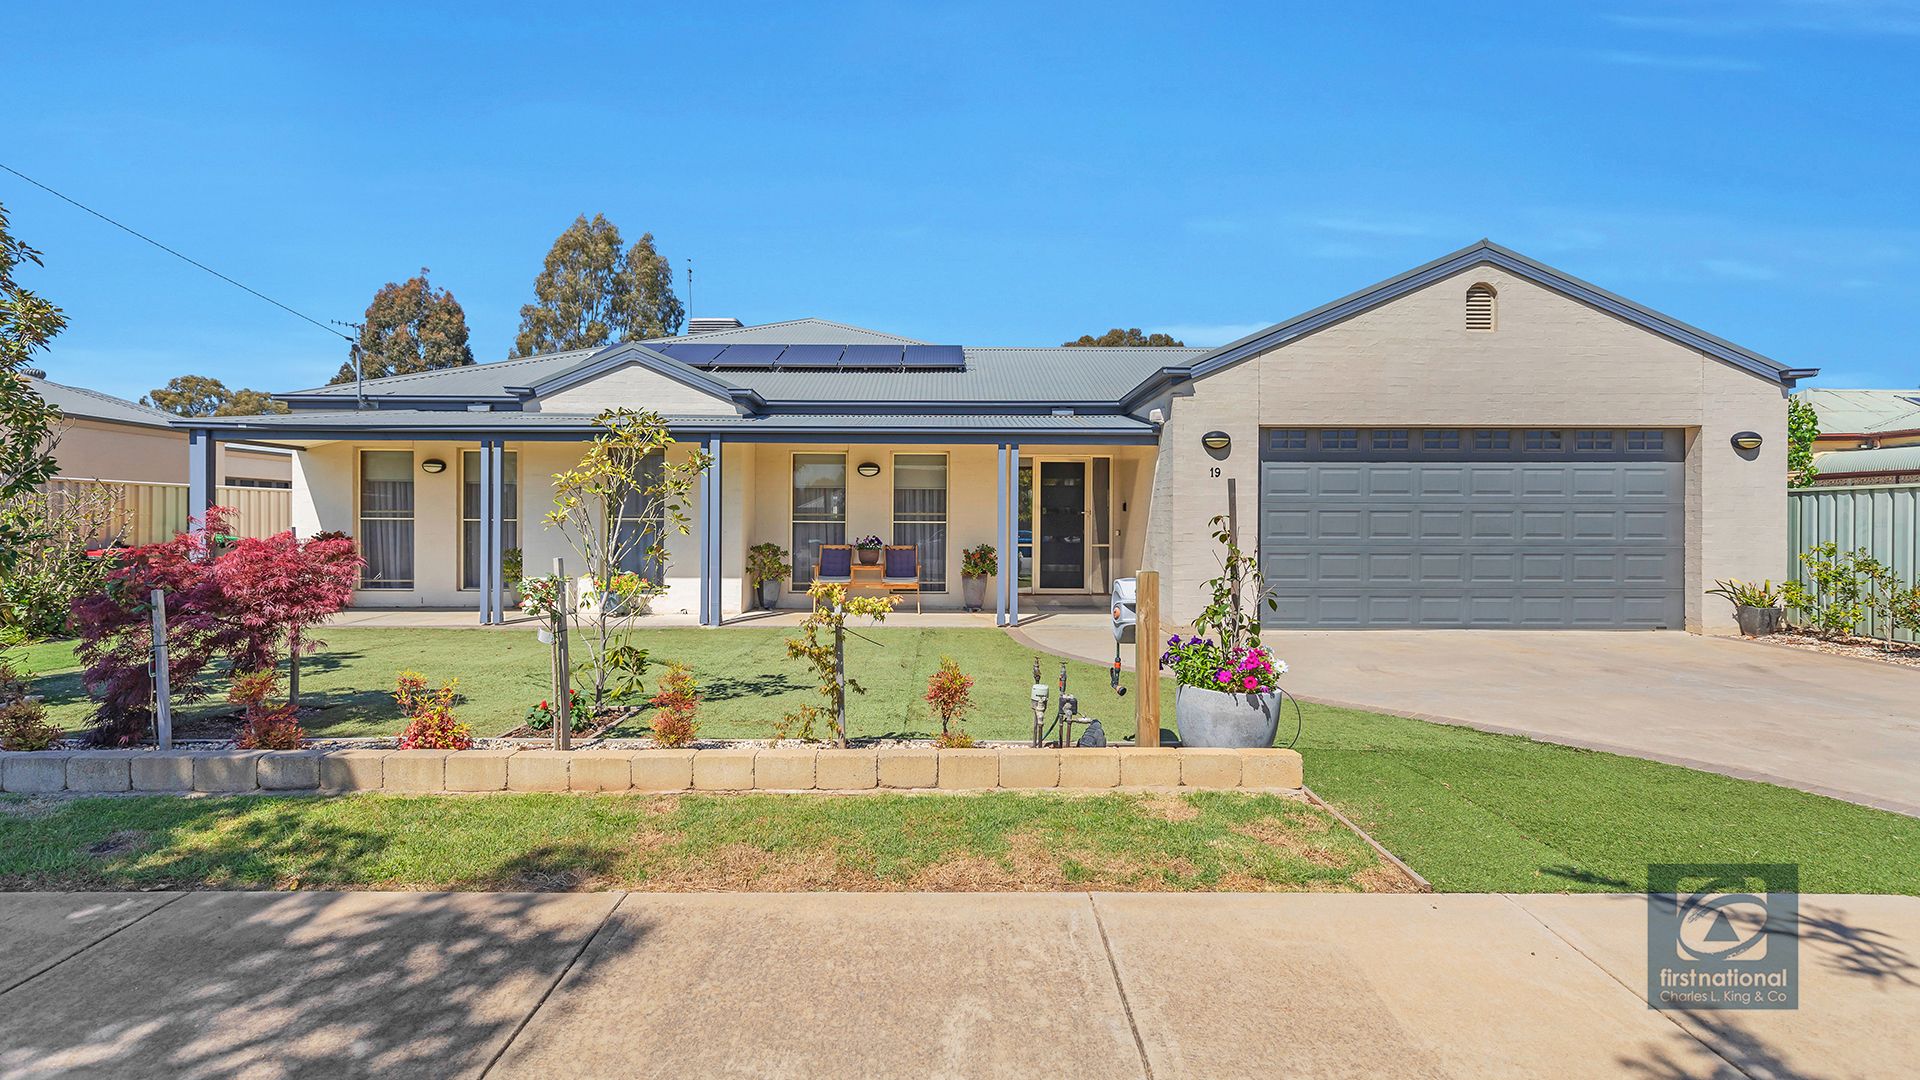 4 bedrooms House in 19 Simms Street MOAMA NSW, 2731